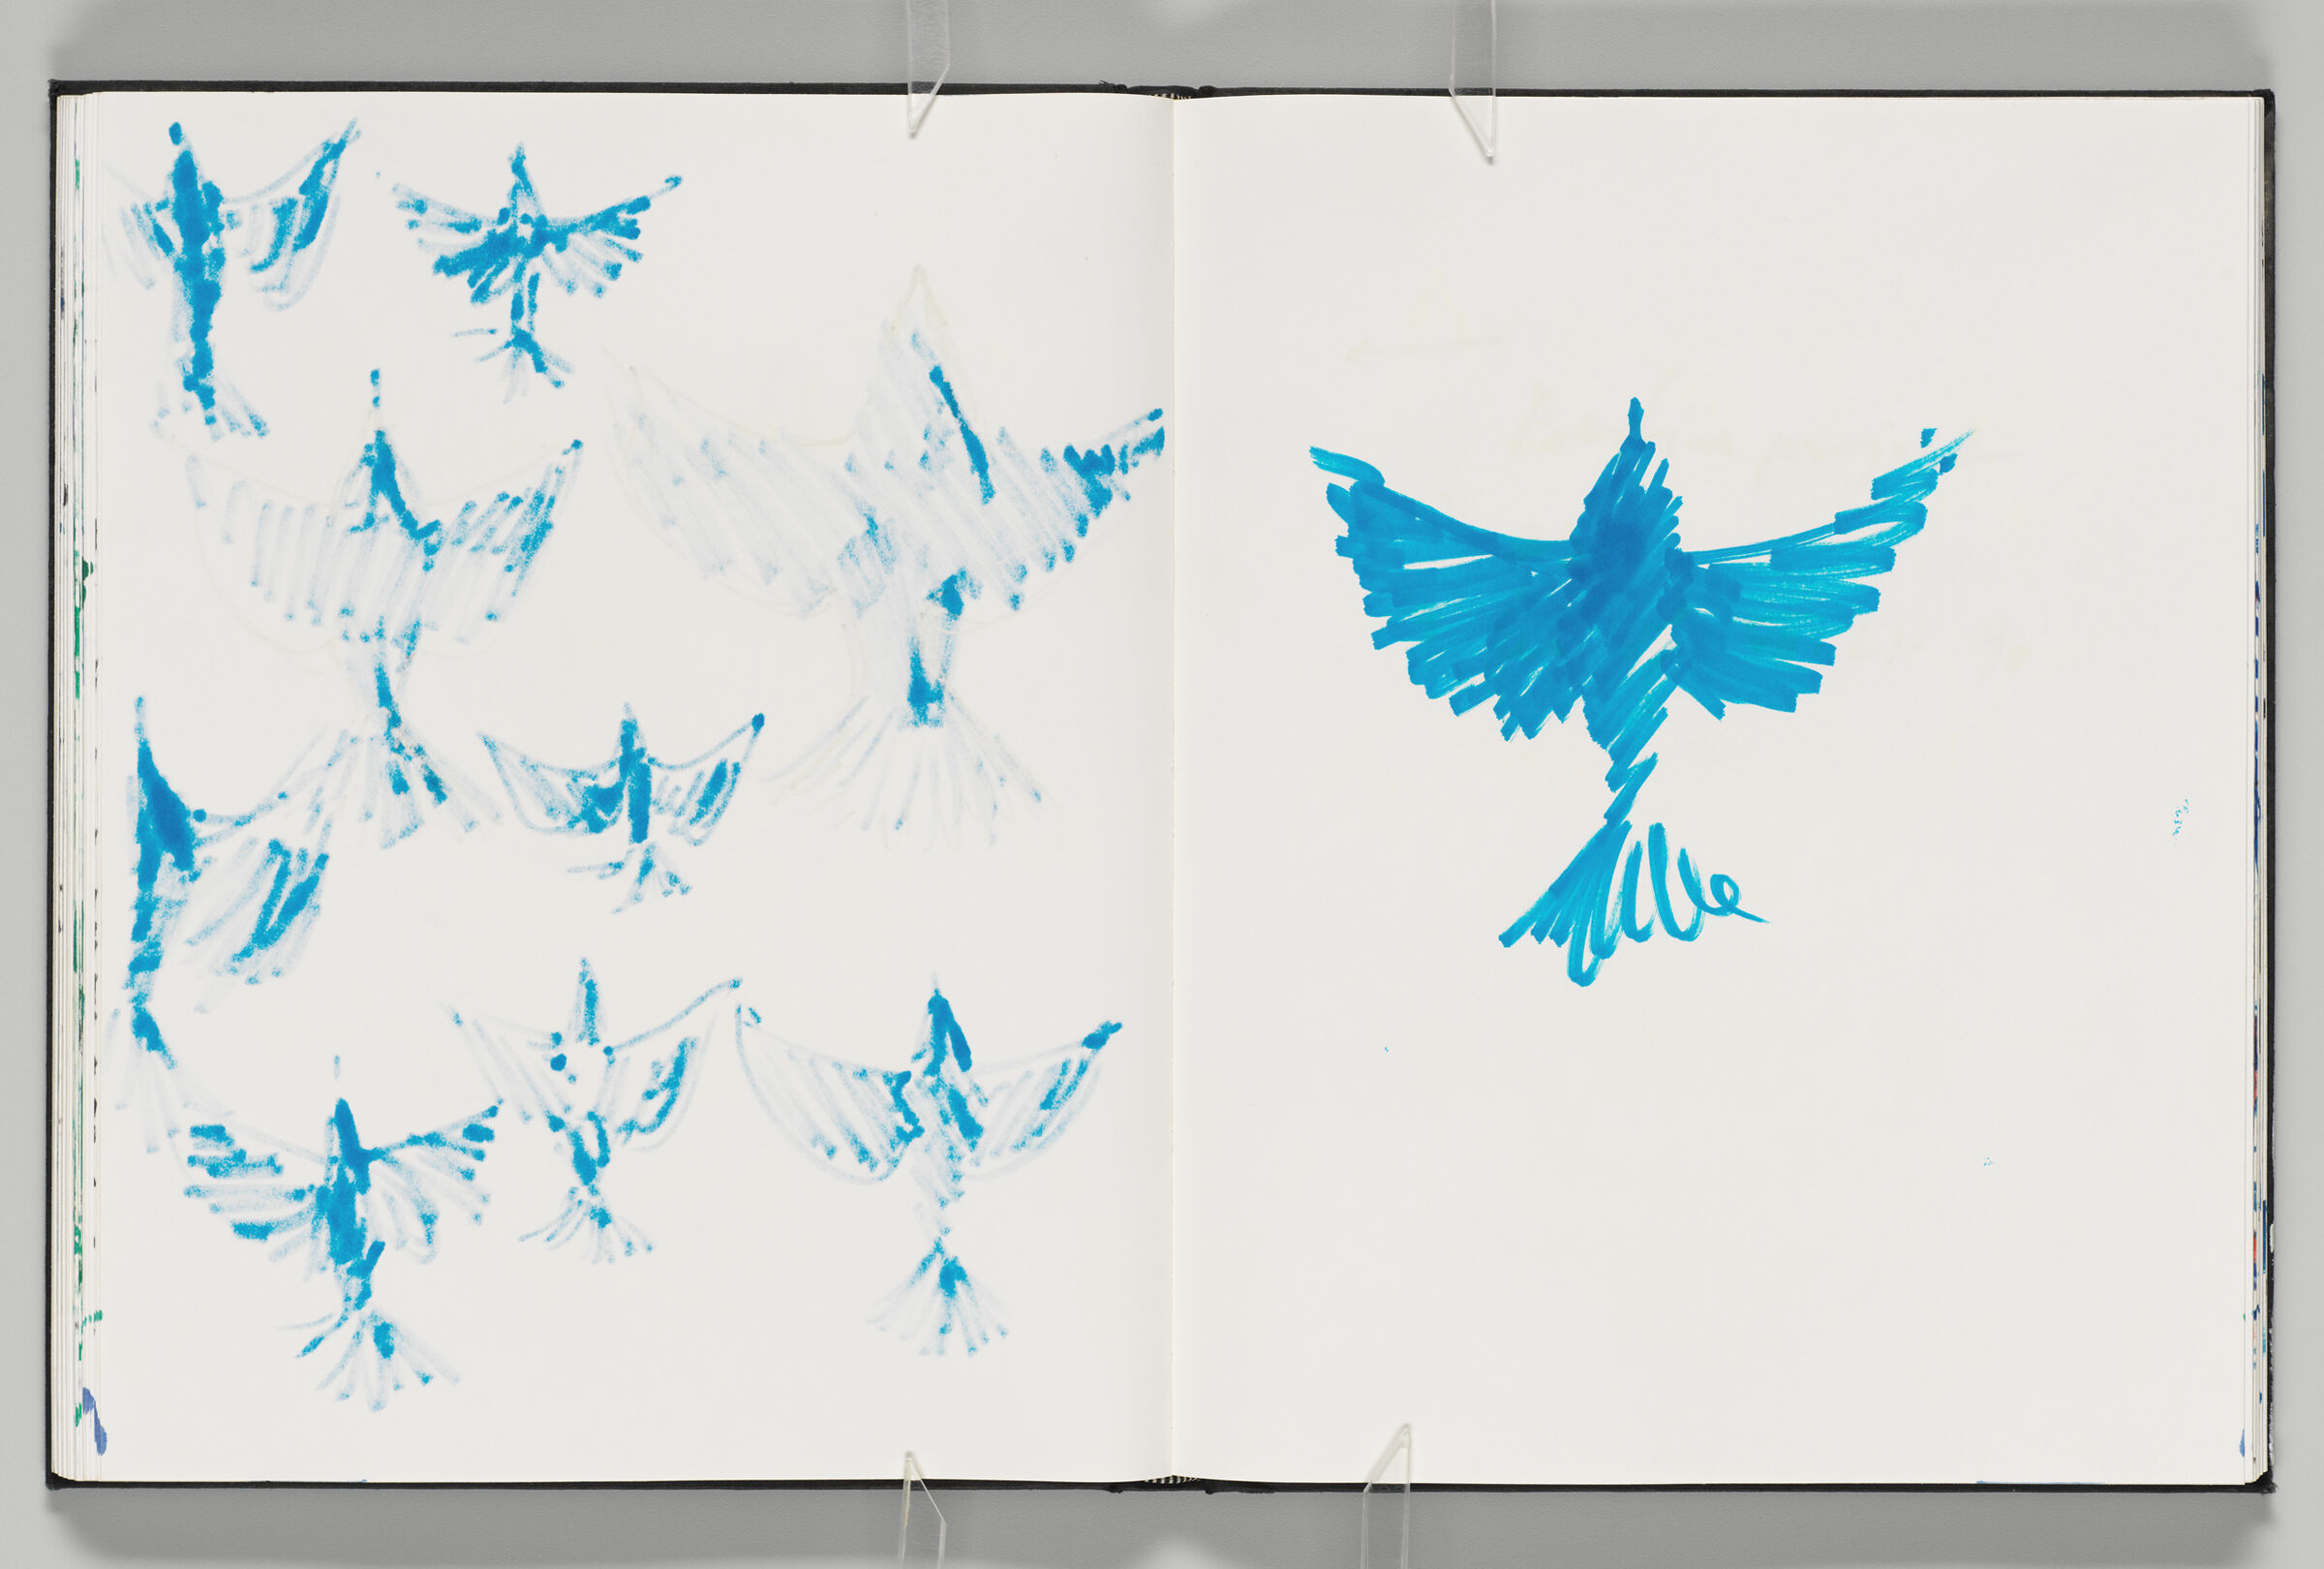 Untitled (Bleed-Through Of Previous Page, Left Page); Untitled (Dove, Right Page)
